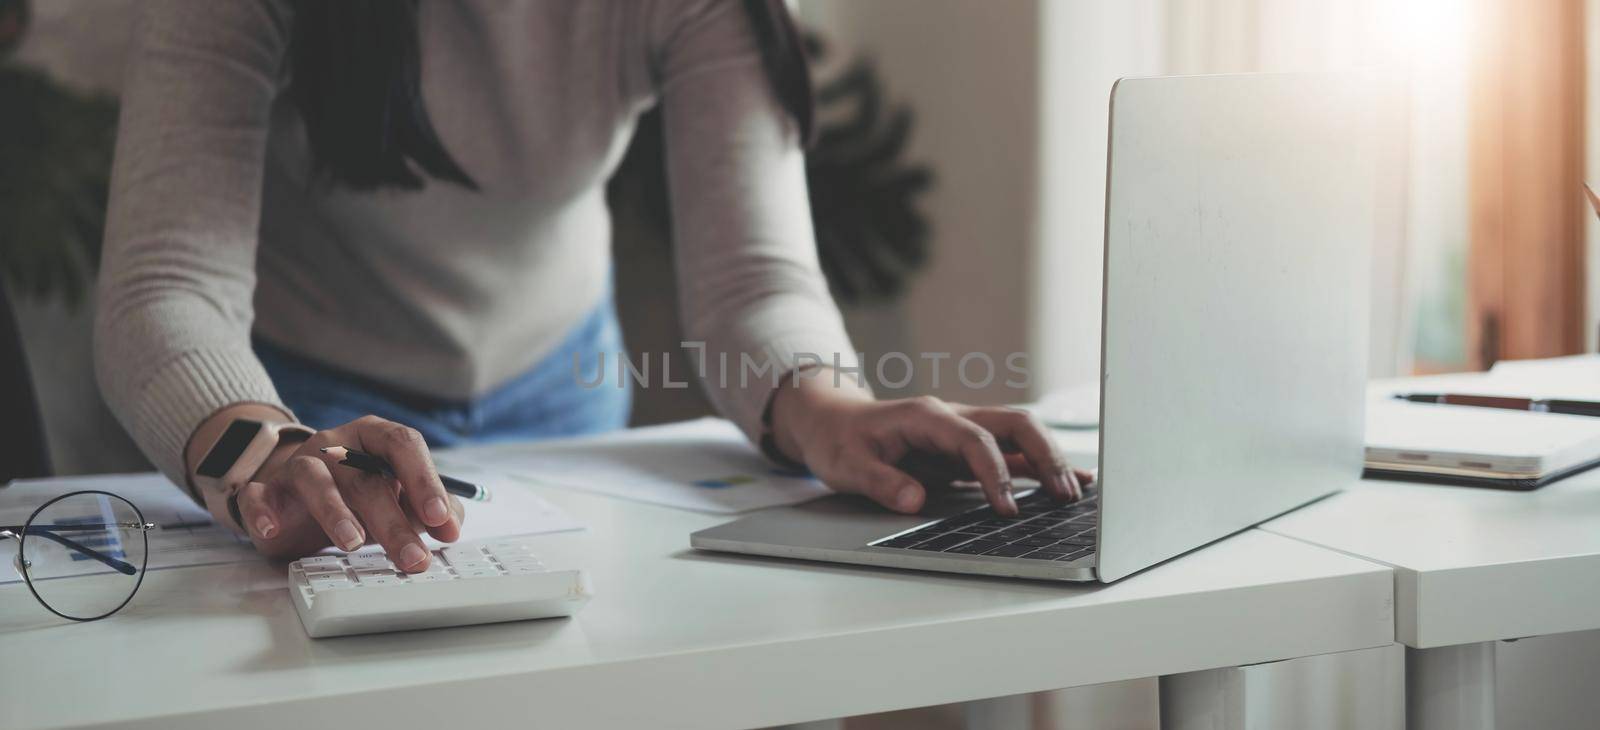 Finance Concept. Woman hold a graph pen, press a calculator and make money by writing reports, and memos, and analyzing business documents with a laptop computer vertically..